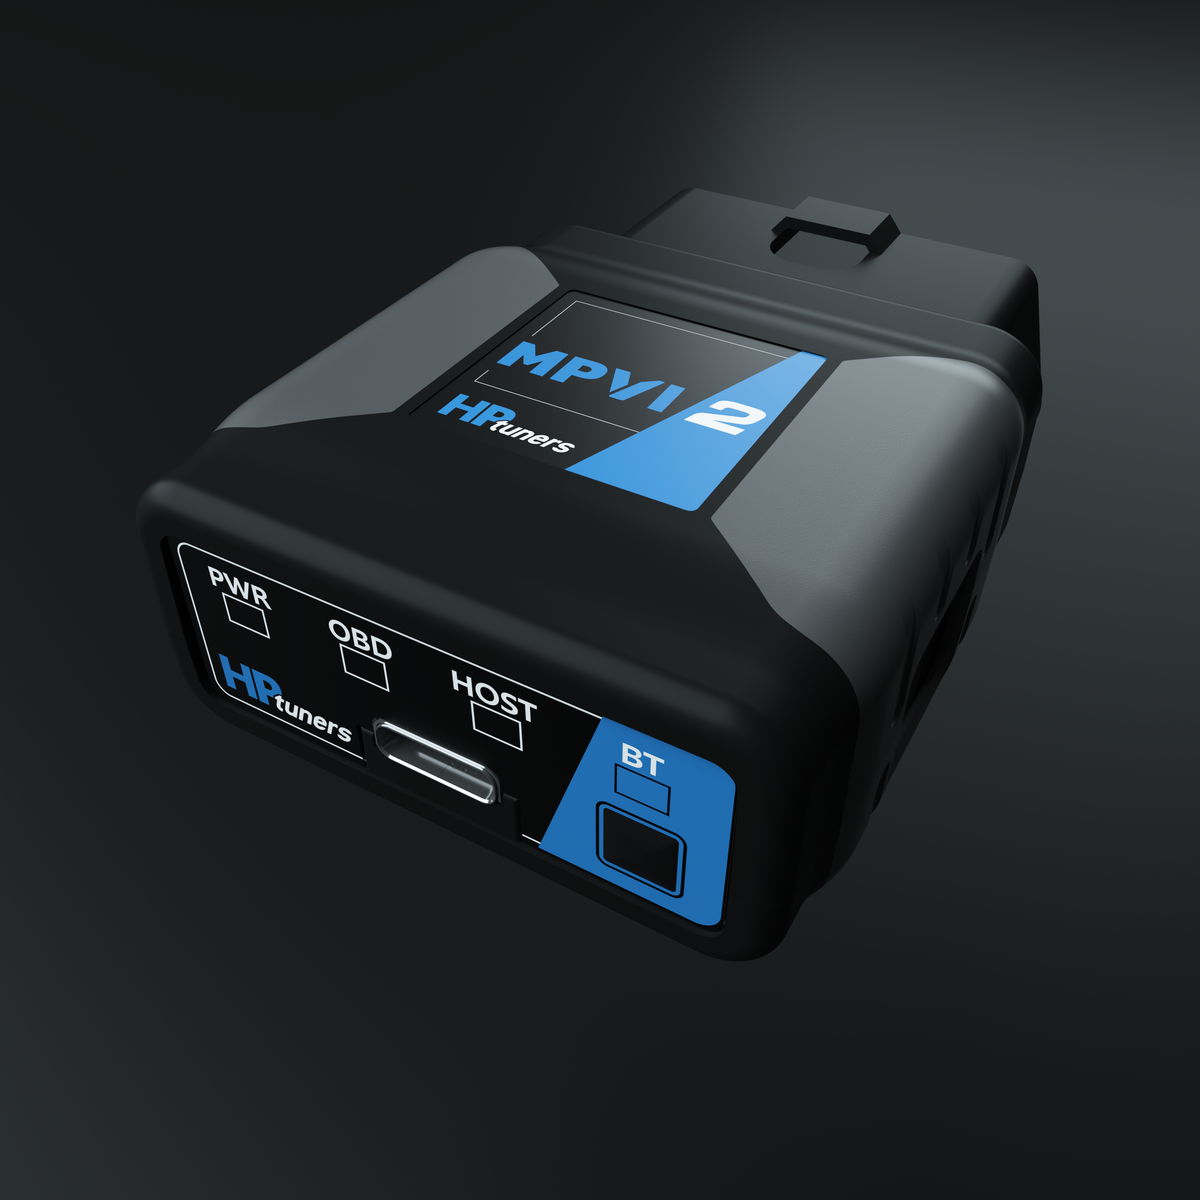 HP Tuners MPVI2 Plus with Pro Link, the latest generation of hardware from HP Tuners, Replaces VCM Suite